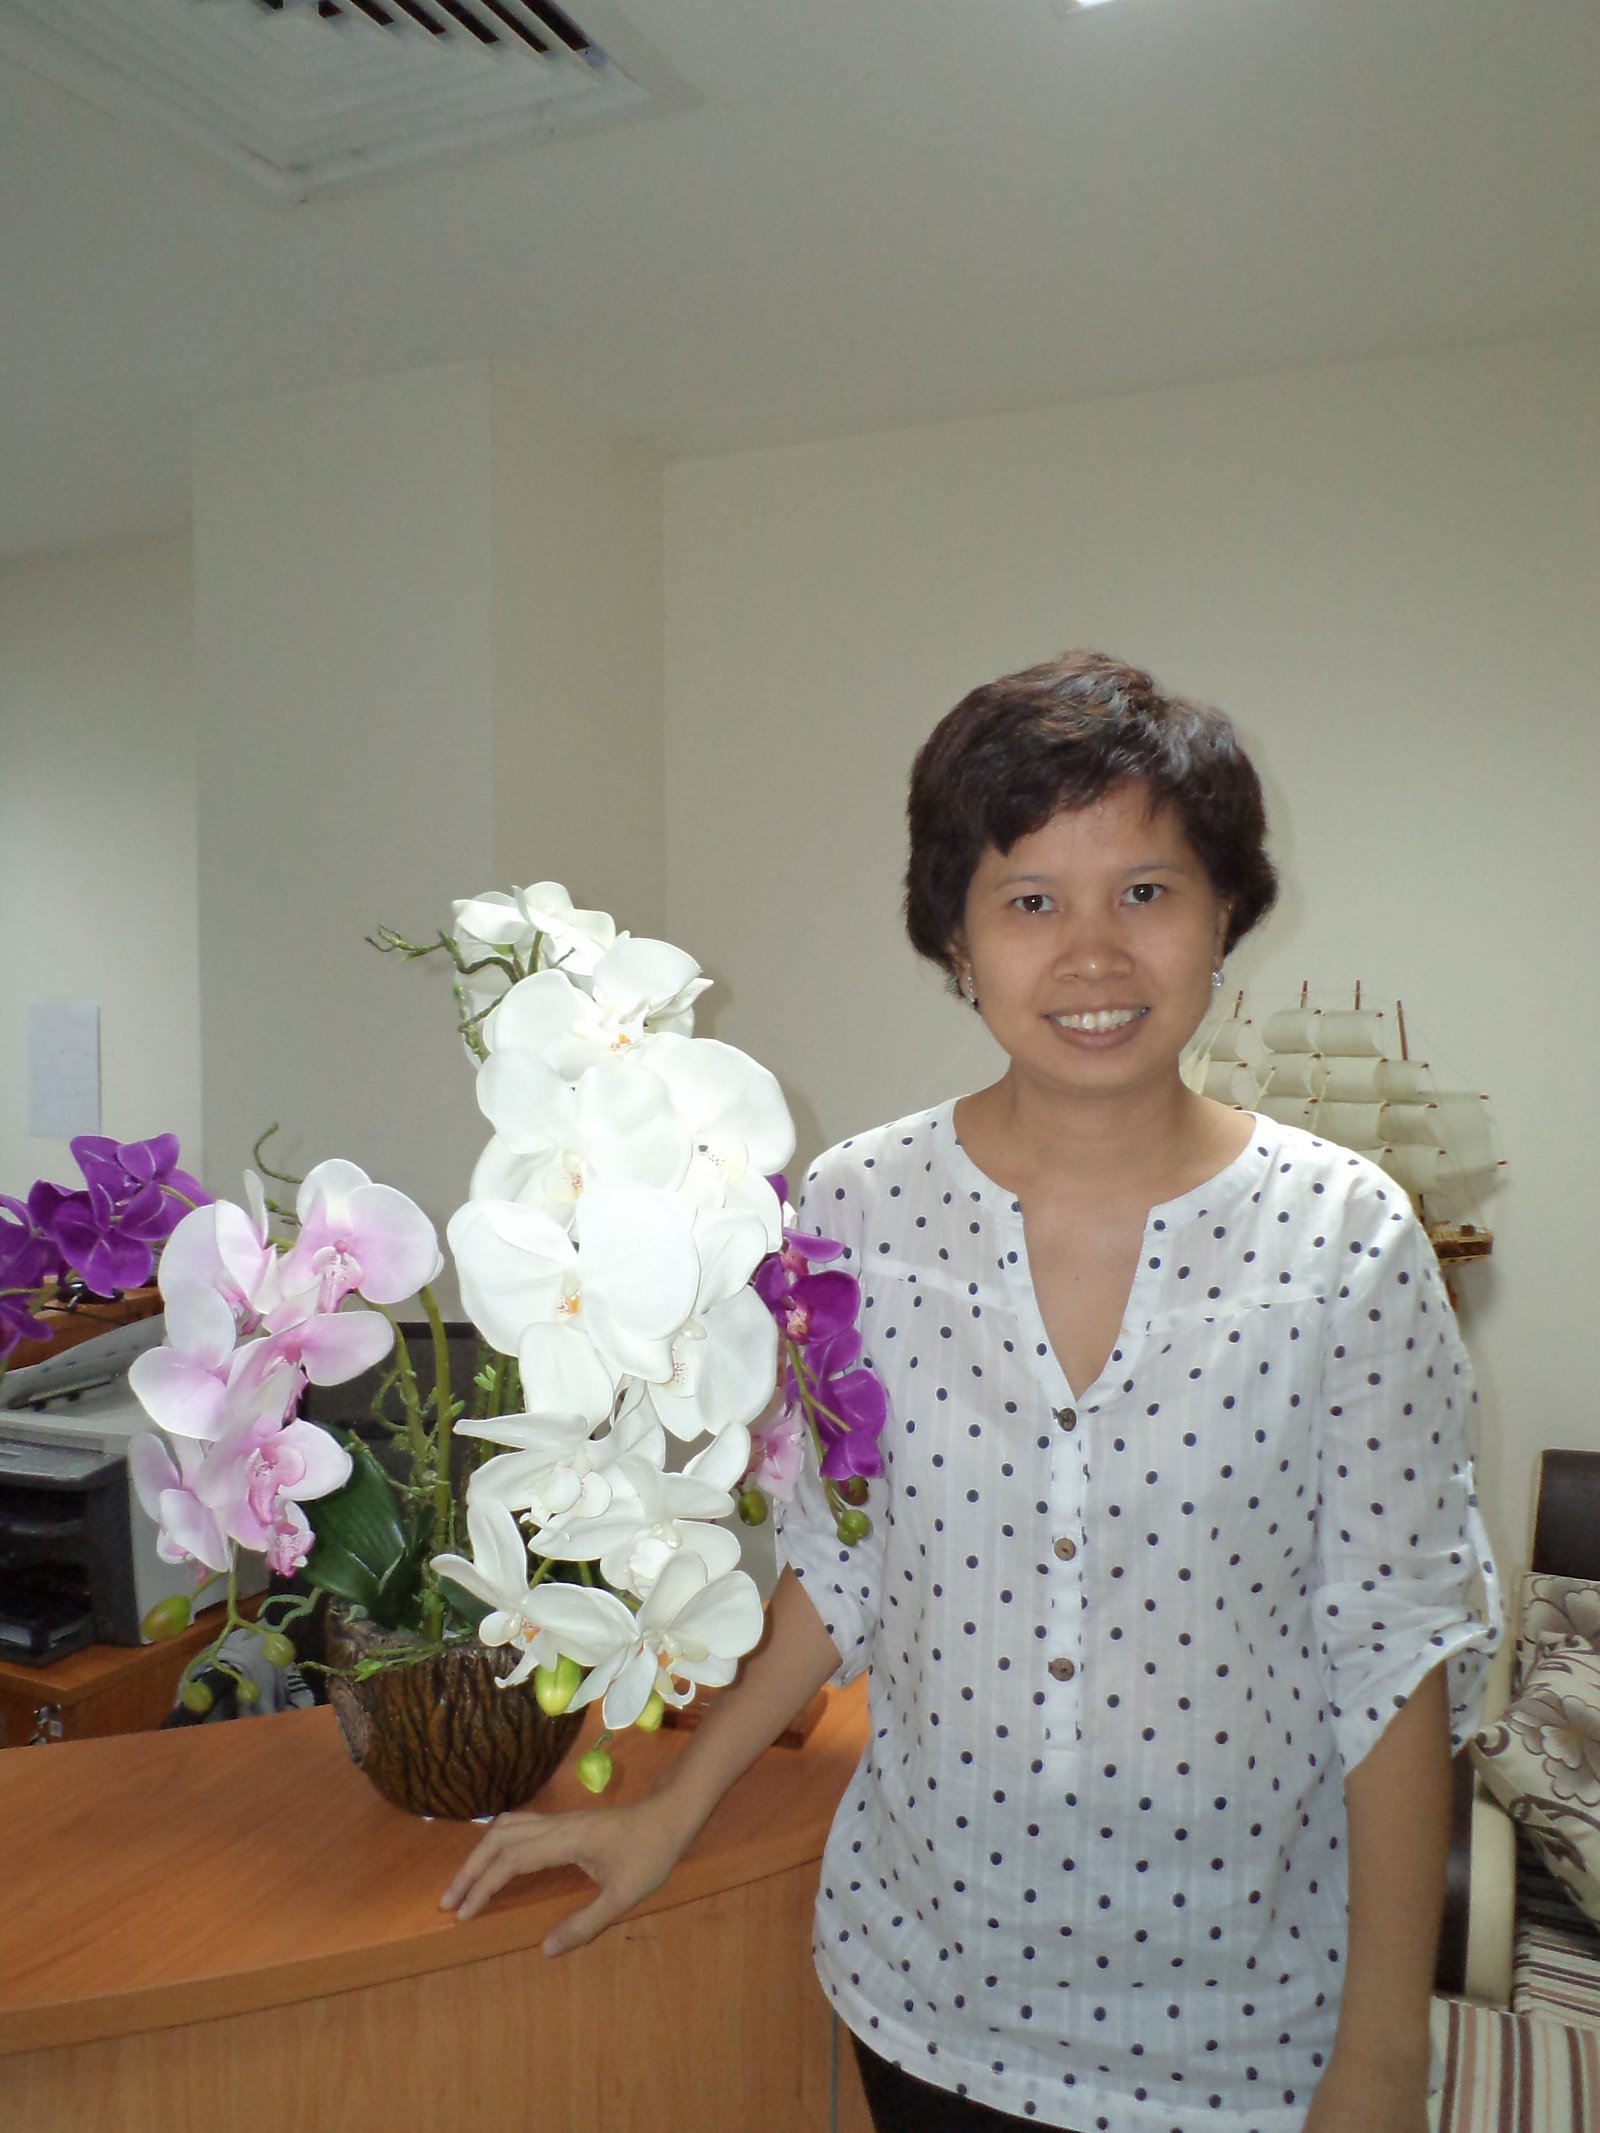 Tran Thi Minh Nguyet (Nguyet Tran) is a General Manager at SMART Research